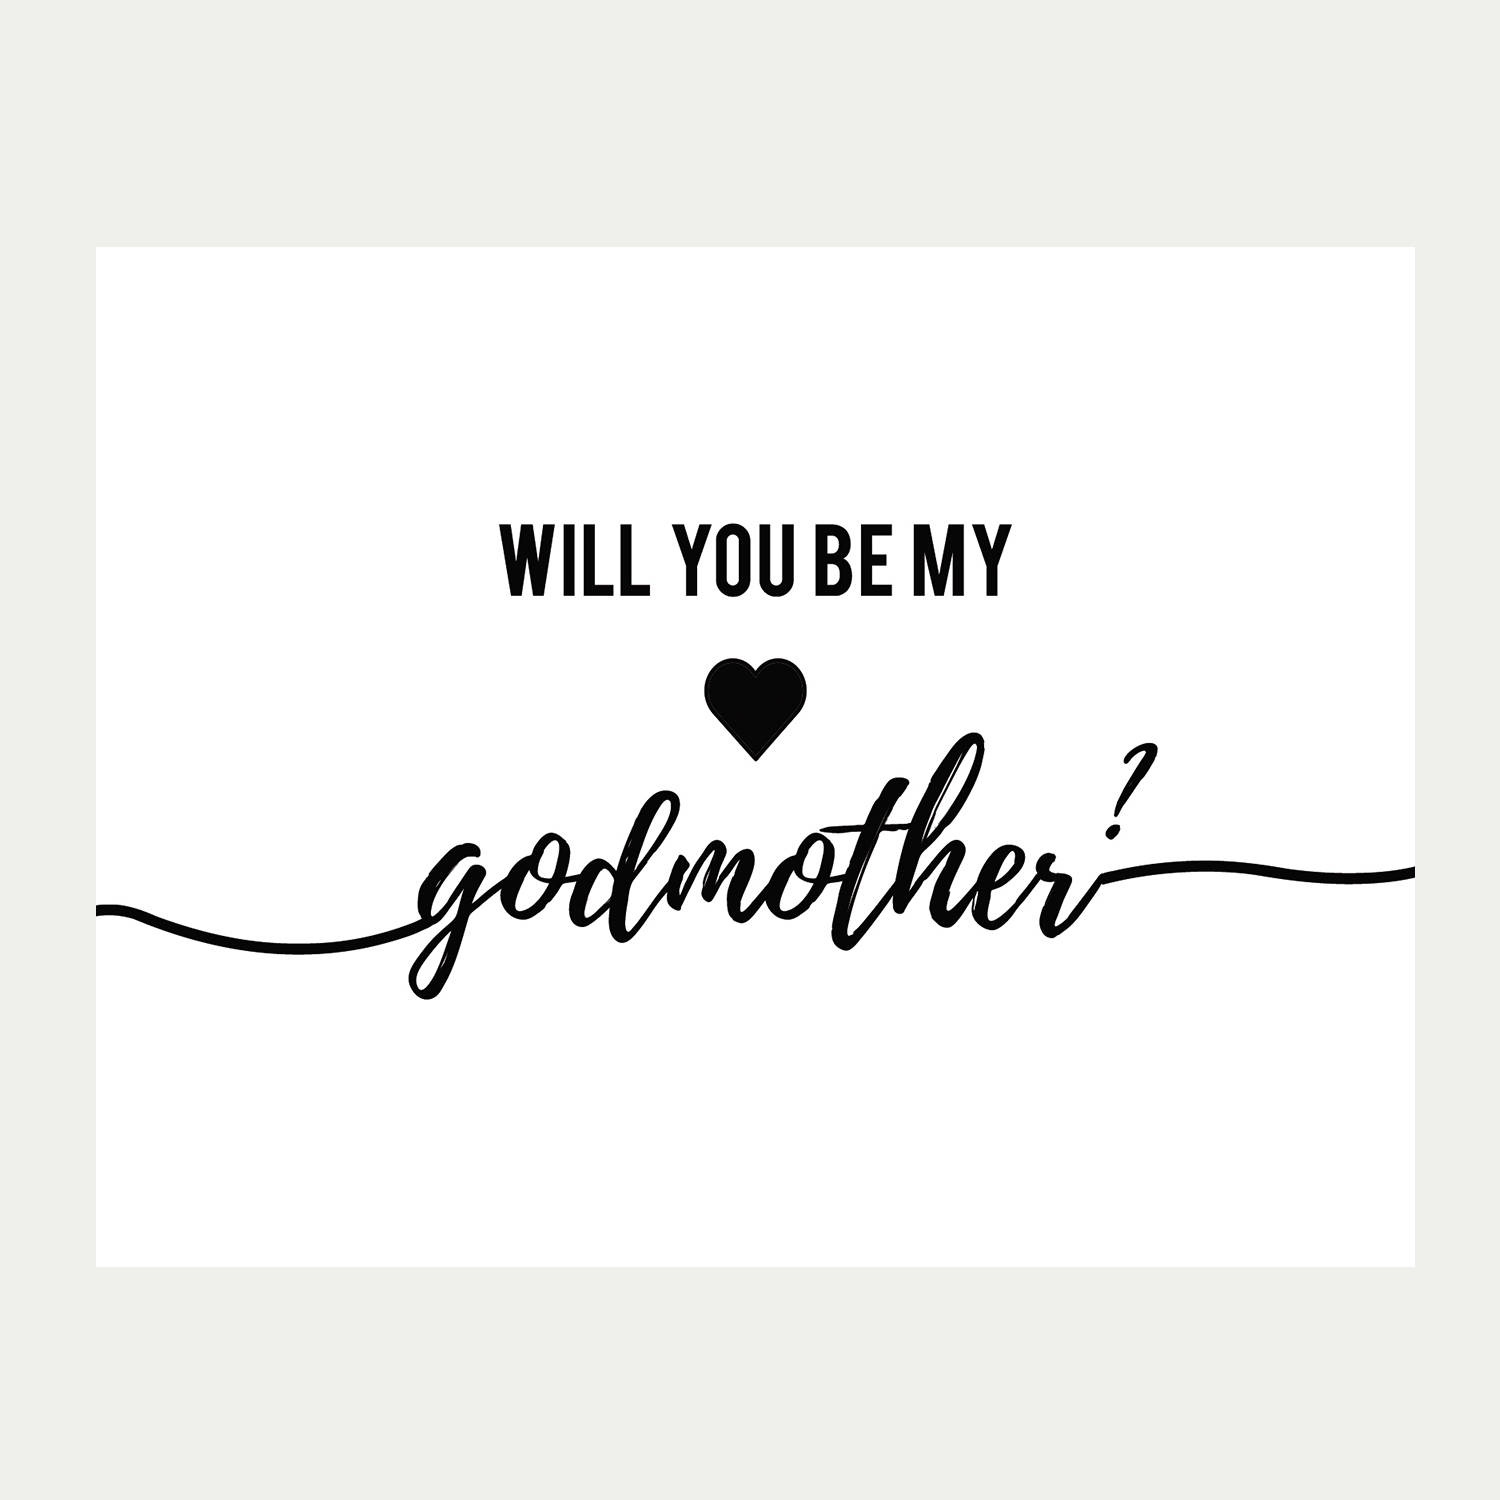 Will You Be My Godmother Card Printable Baptism Card | Etsy - Will You Be My Godmother Printable Card Free